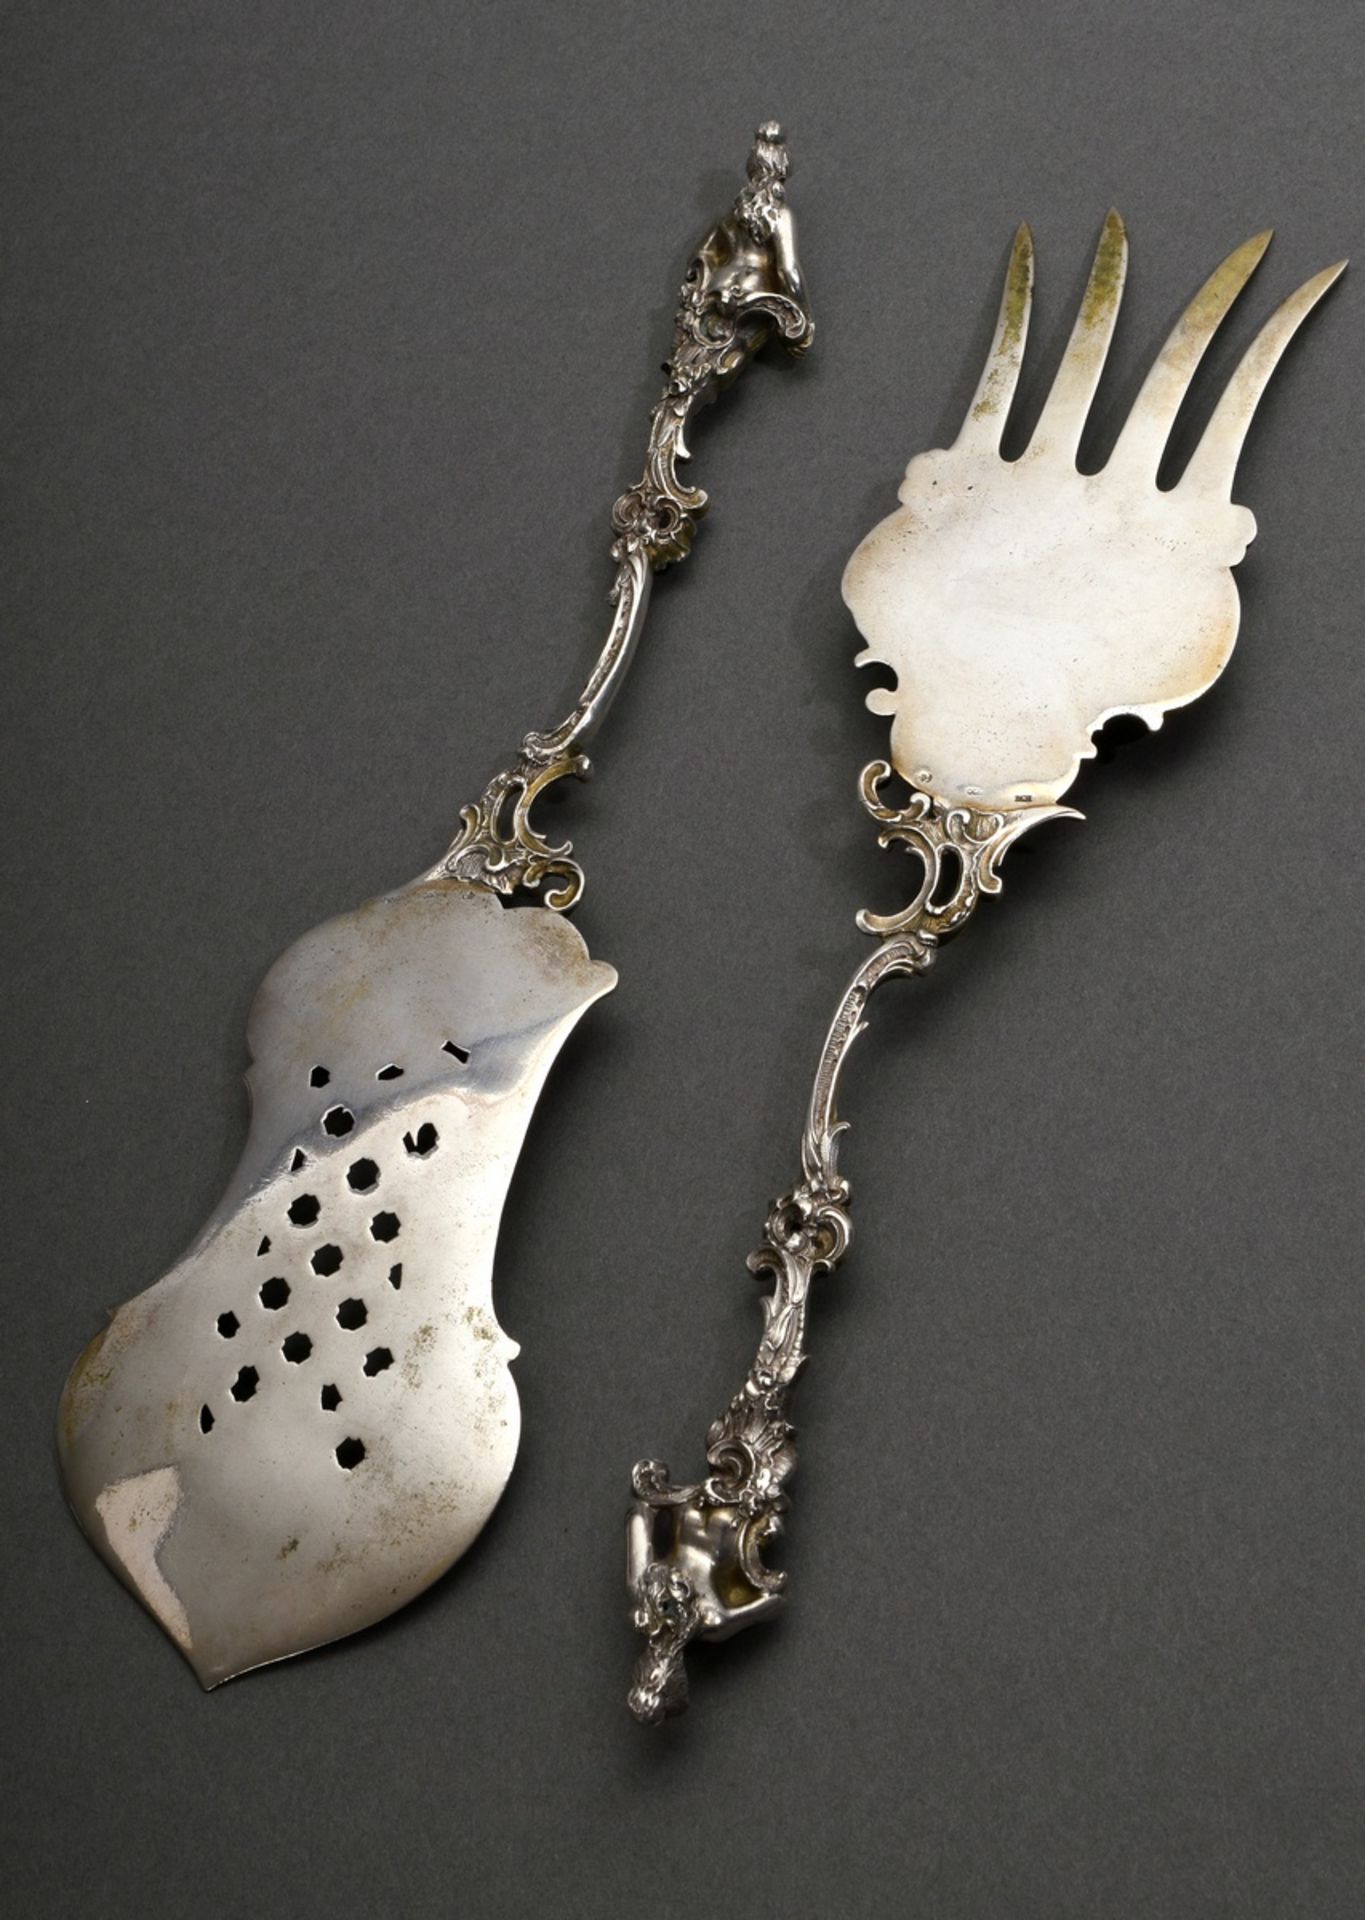 2 Pieces opulent Neo-Rococo fish serving cutlery with sculptural figurative handles and fish relief - Image 2 of 6